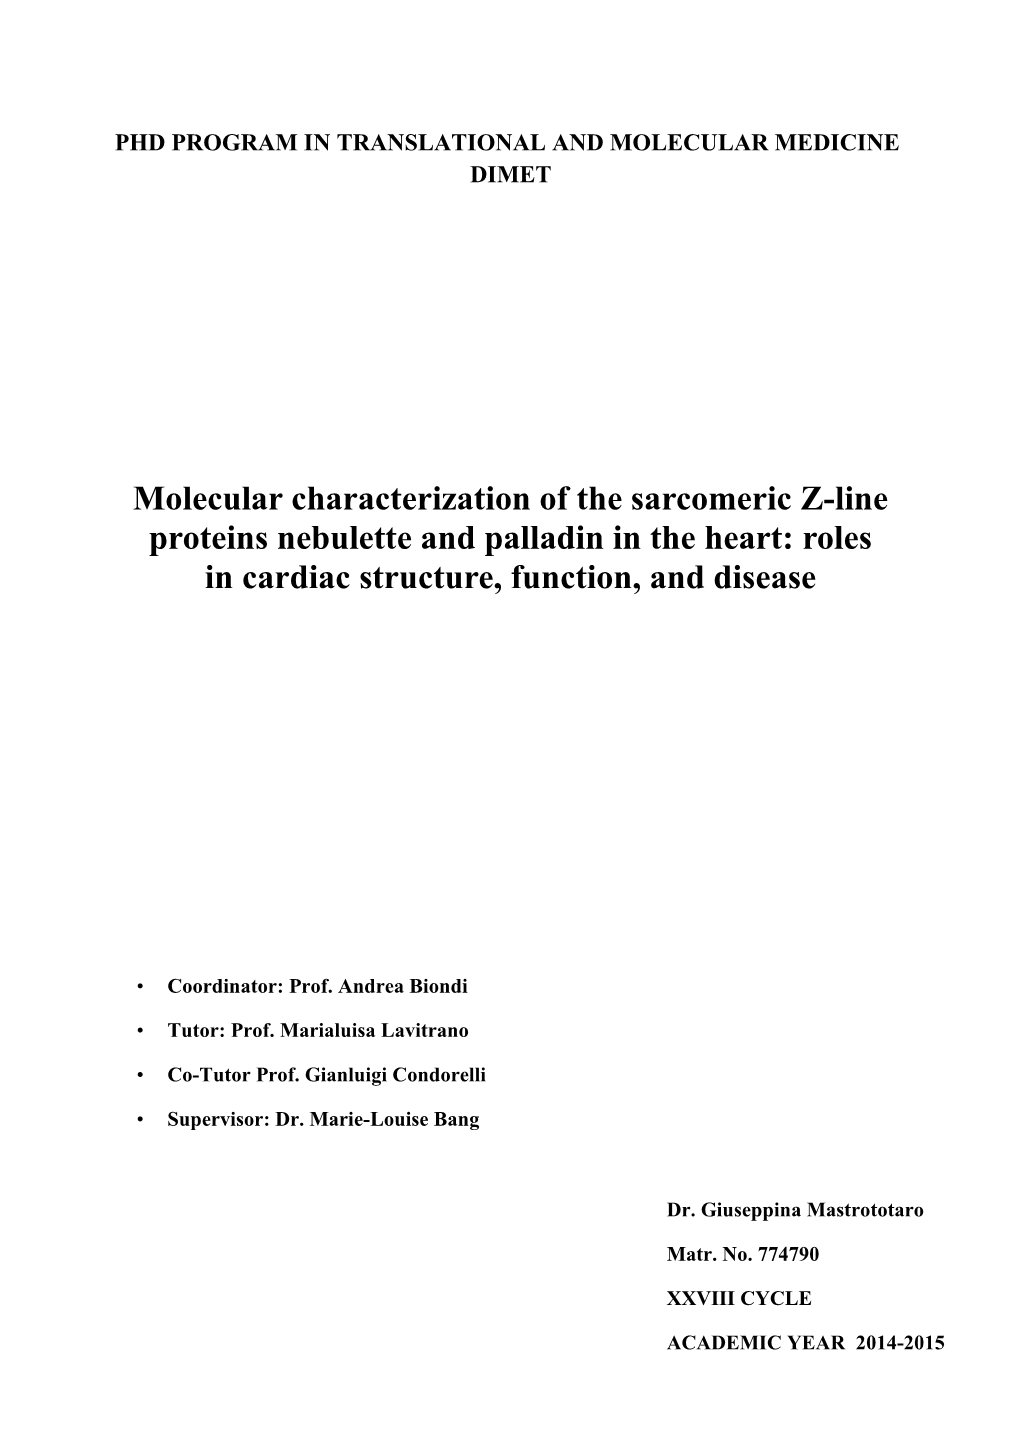 Molecular Characterization of the Sarcomeric Z-Line Proteins Nebulette and Palladin in the Heart: Roles in Cardiac Structure, Function, and Disease